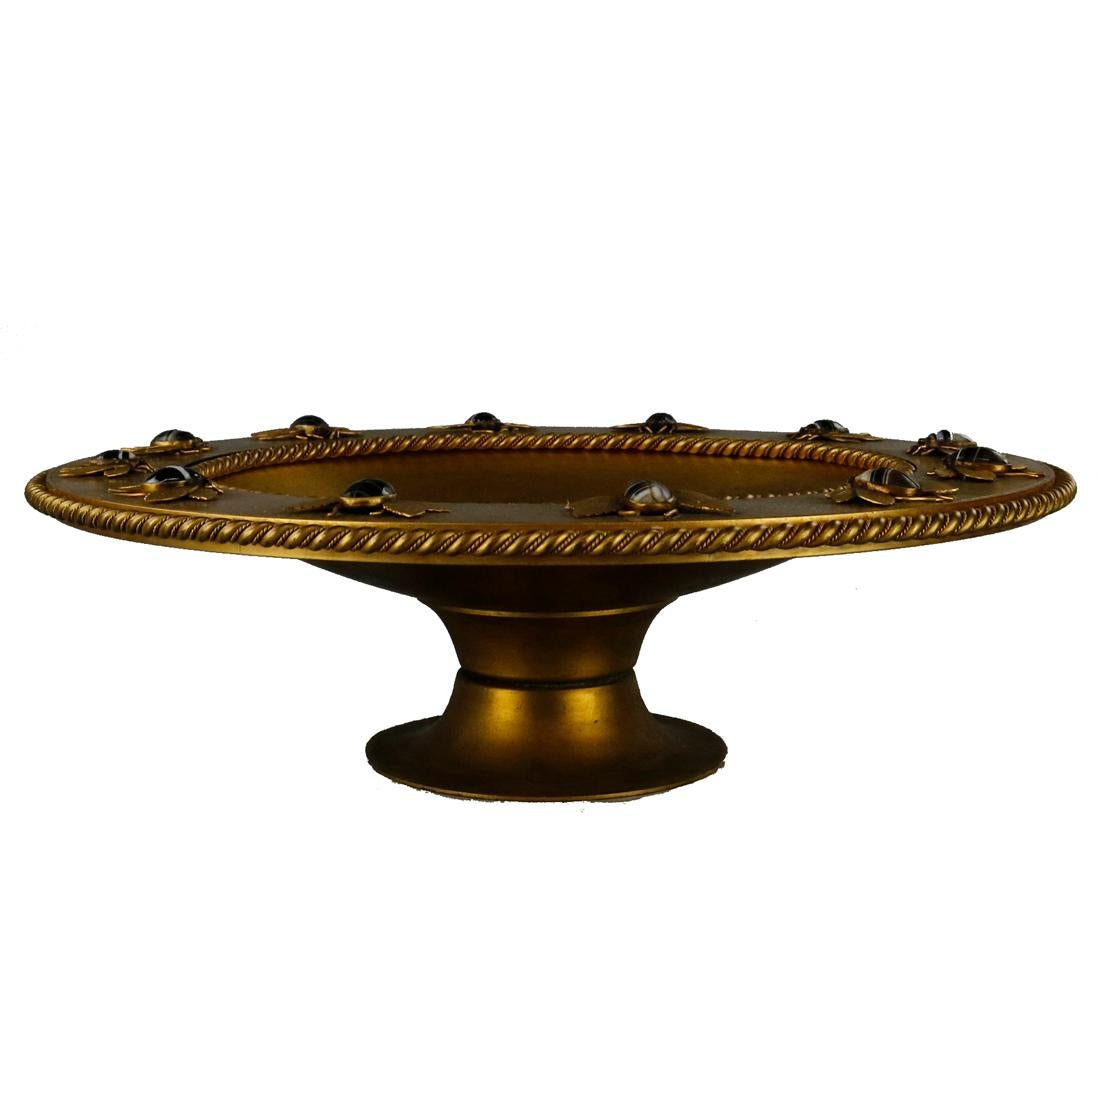 An antique Egyptian Revival tazza offers gilt bronze construction with rim having rope twist trim and applied carved agate scarabs in the form of insects, circa 1870.

Measures: 4